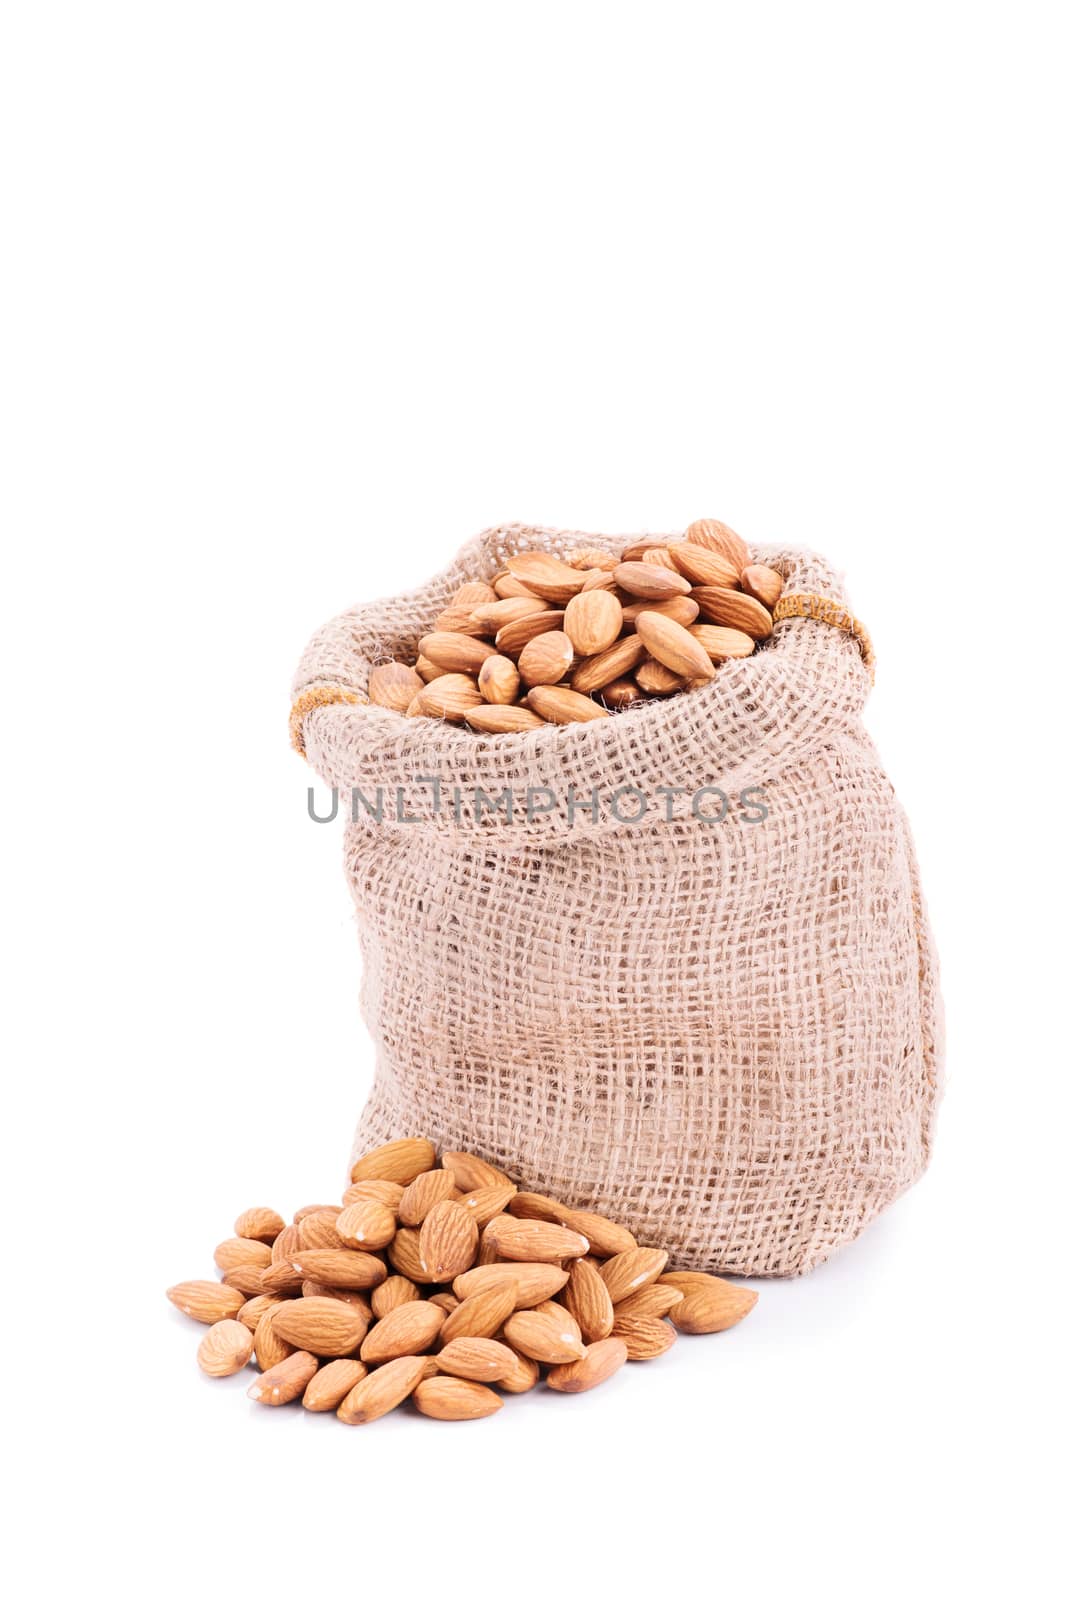 Small sack of fresh almonds by Mendelex